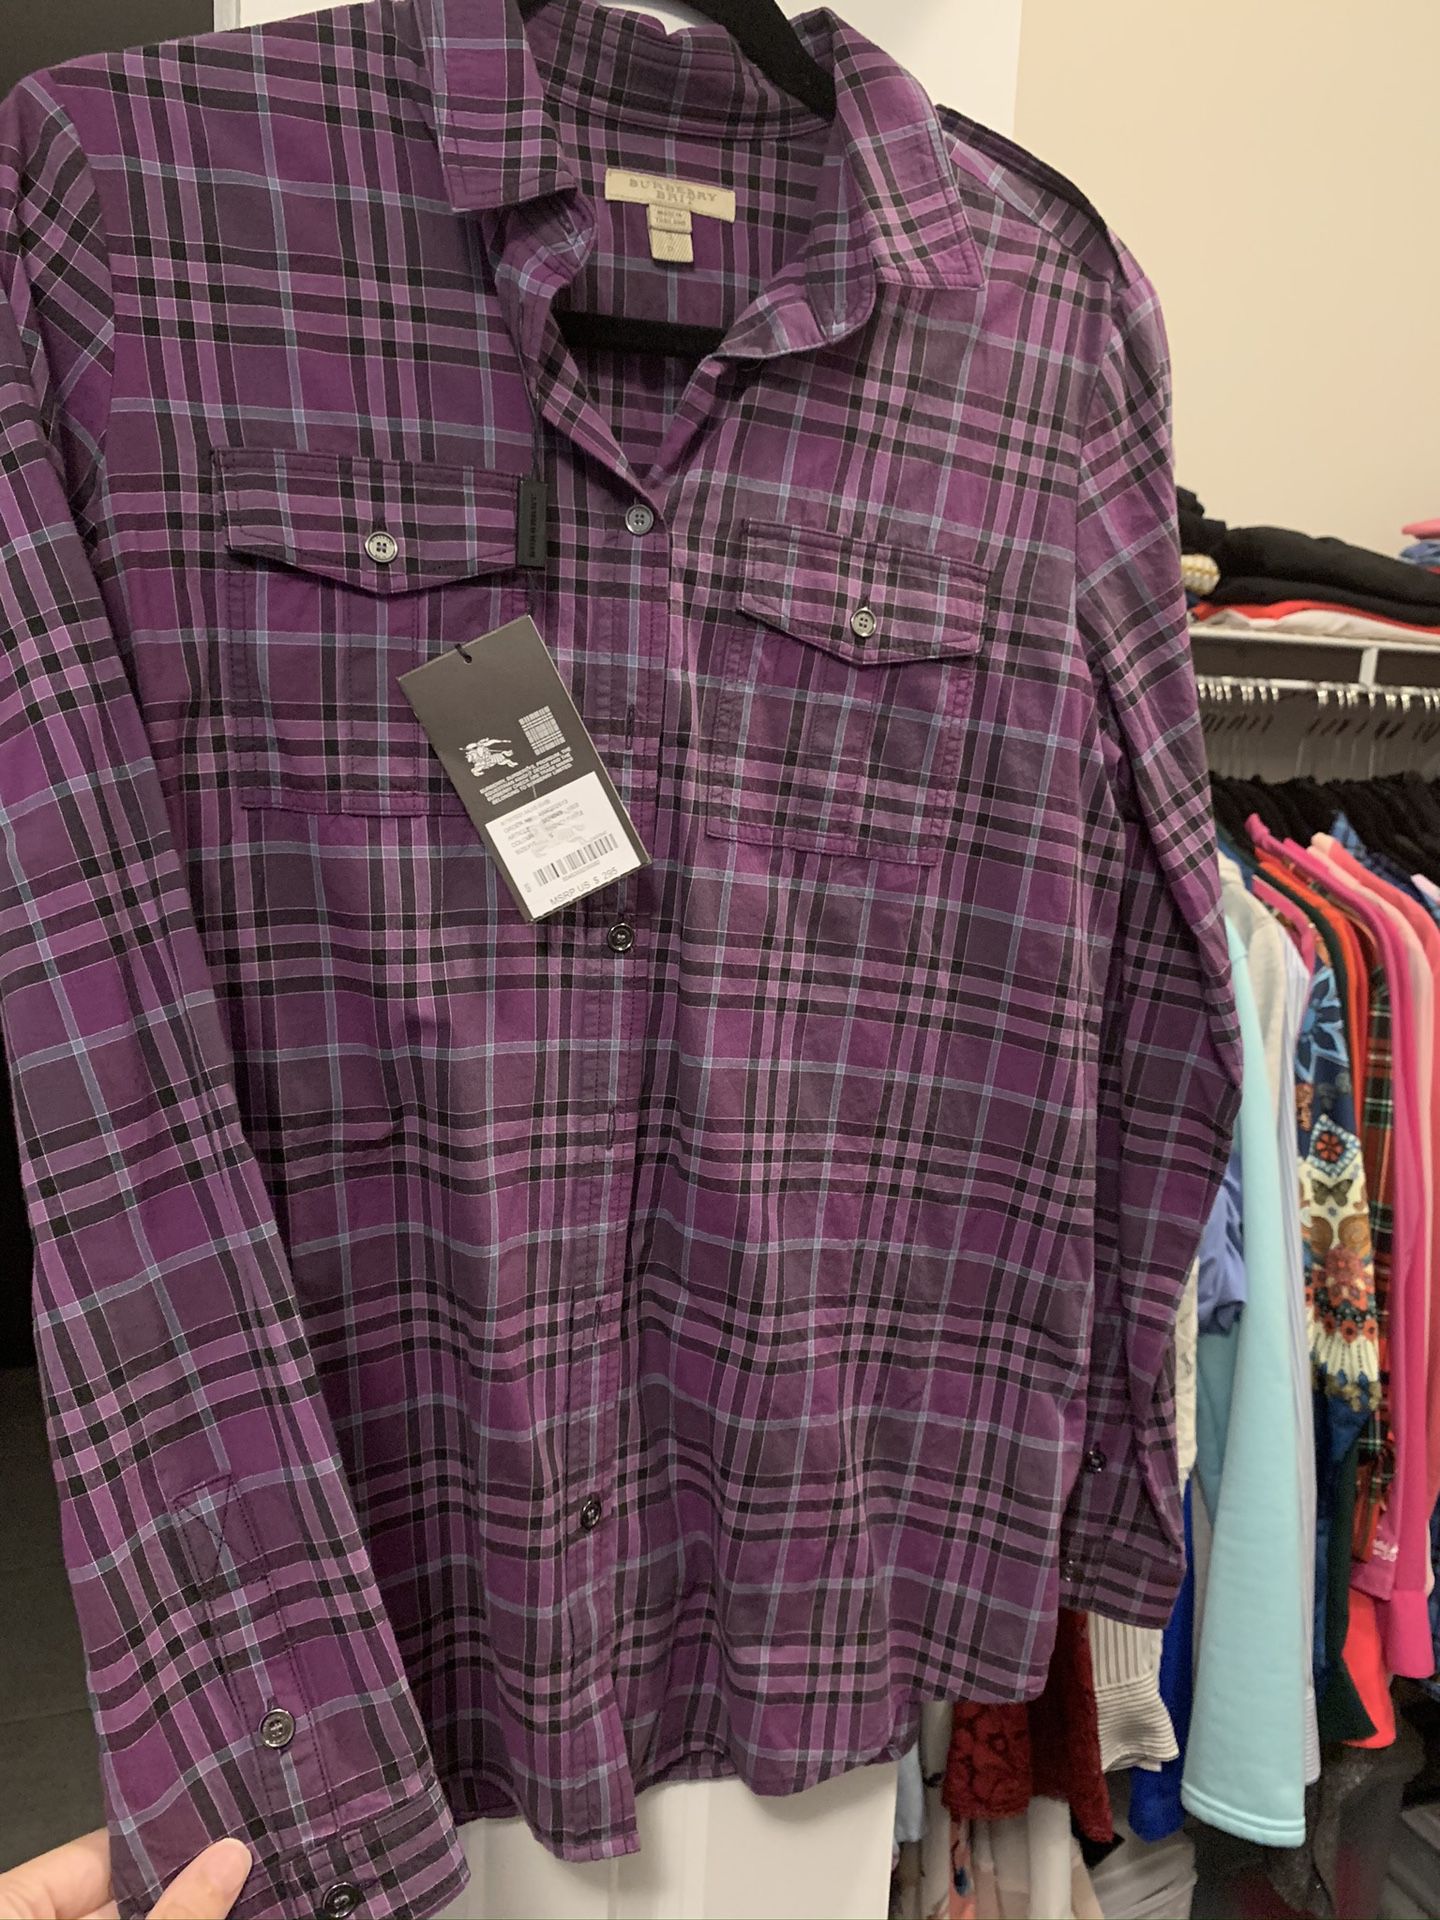 Women fitted New Burberry Shirt Size Small (Value $295)